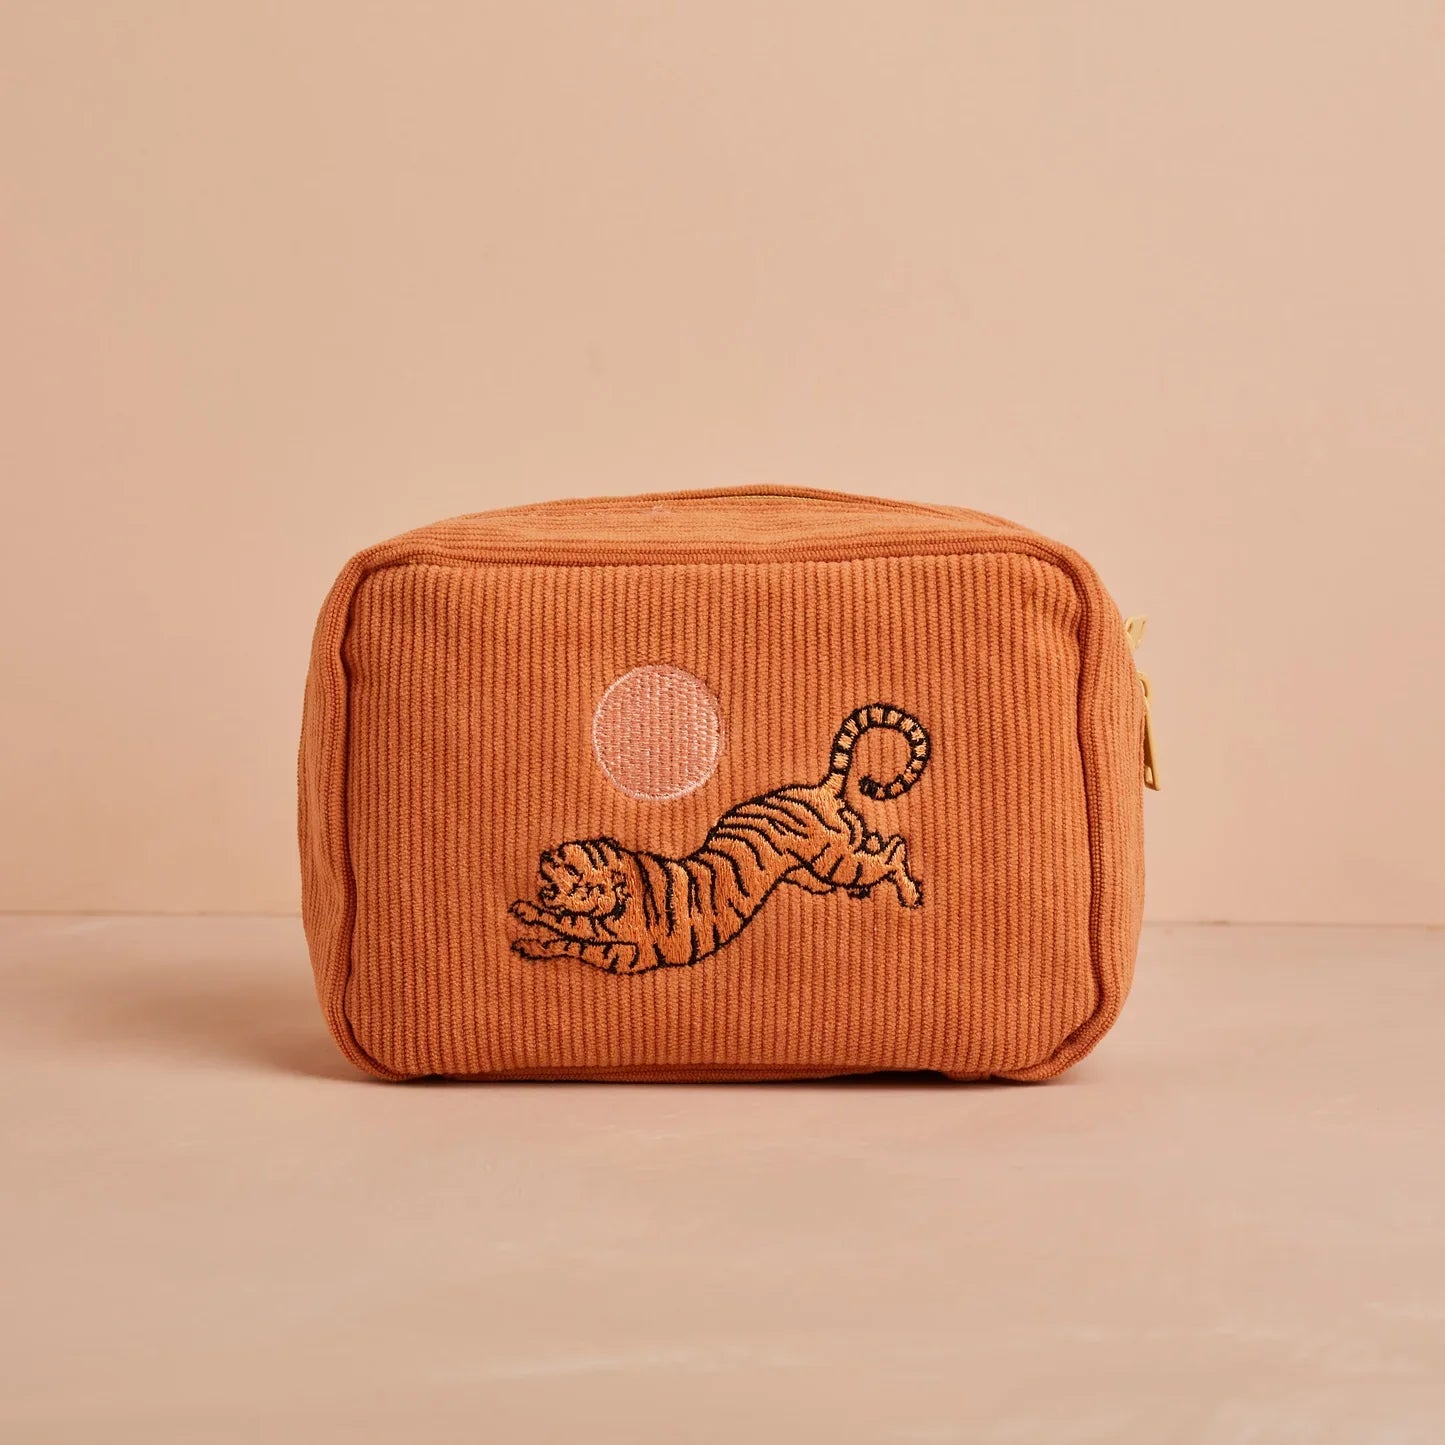 Corduroy Make-Up Bag in Dusty Pink